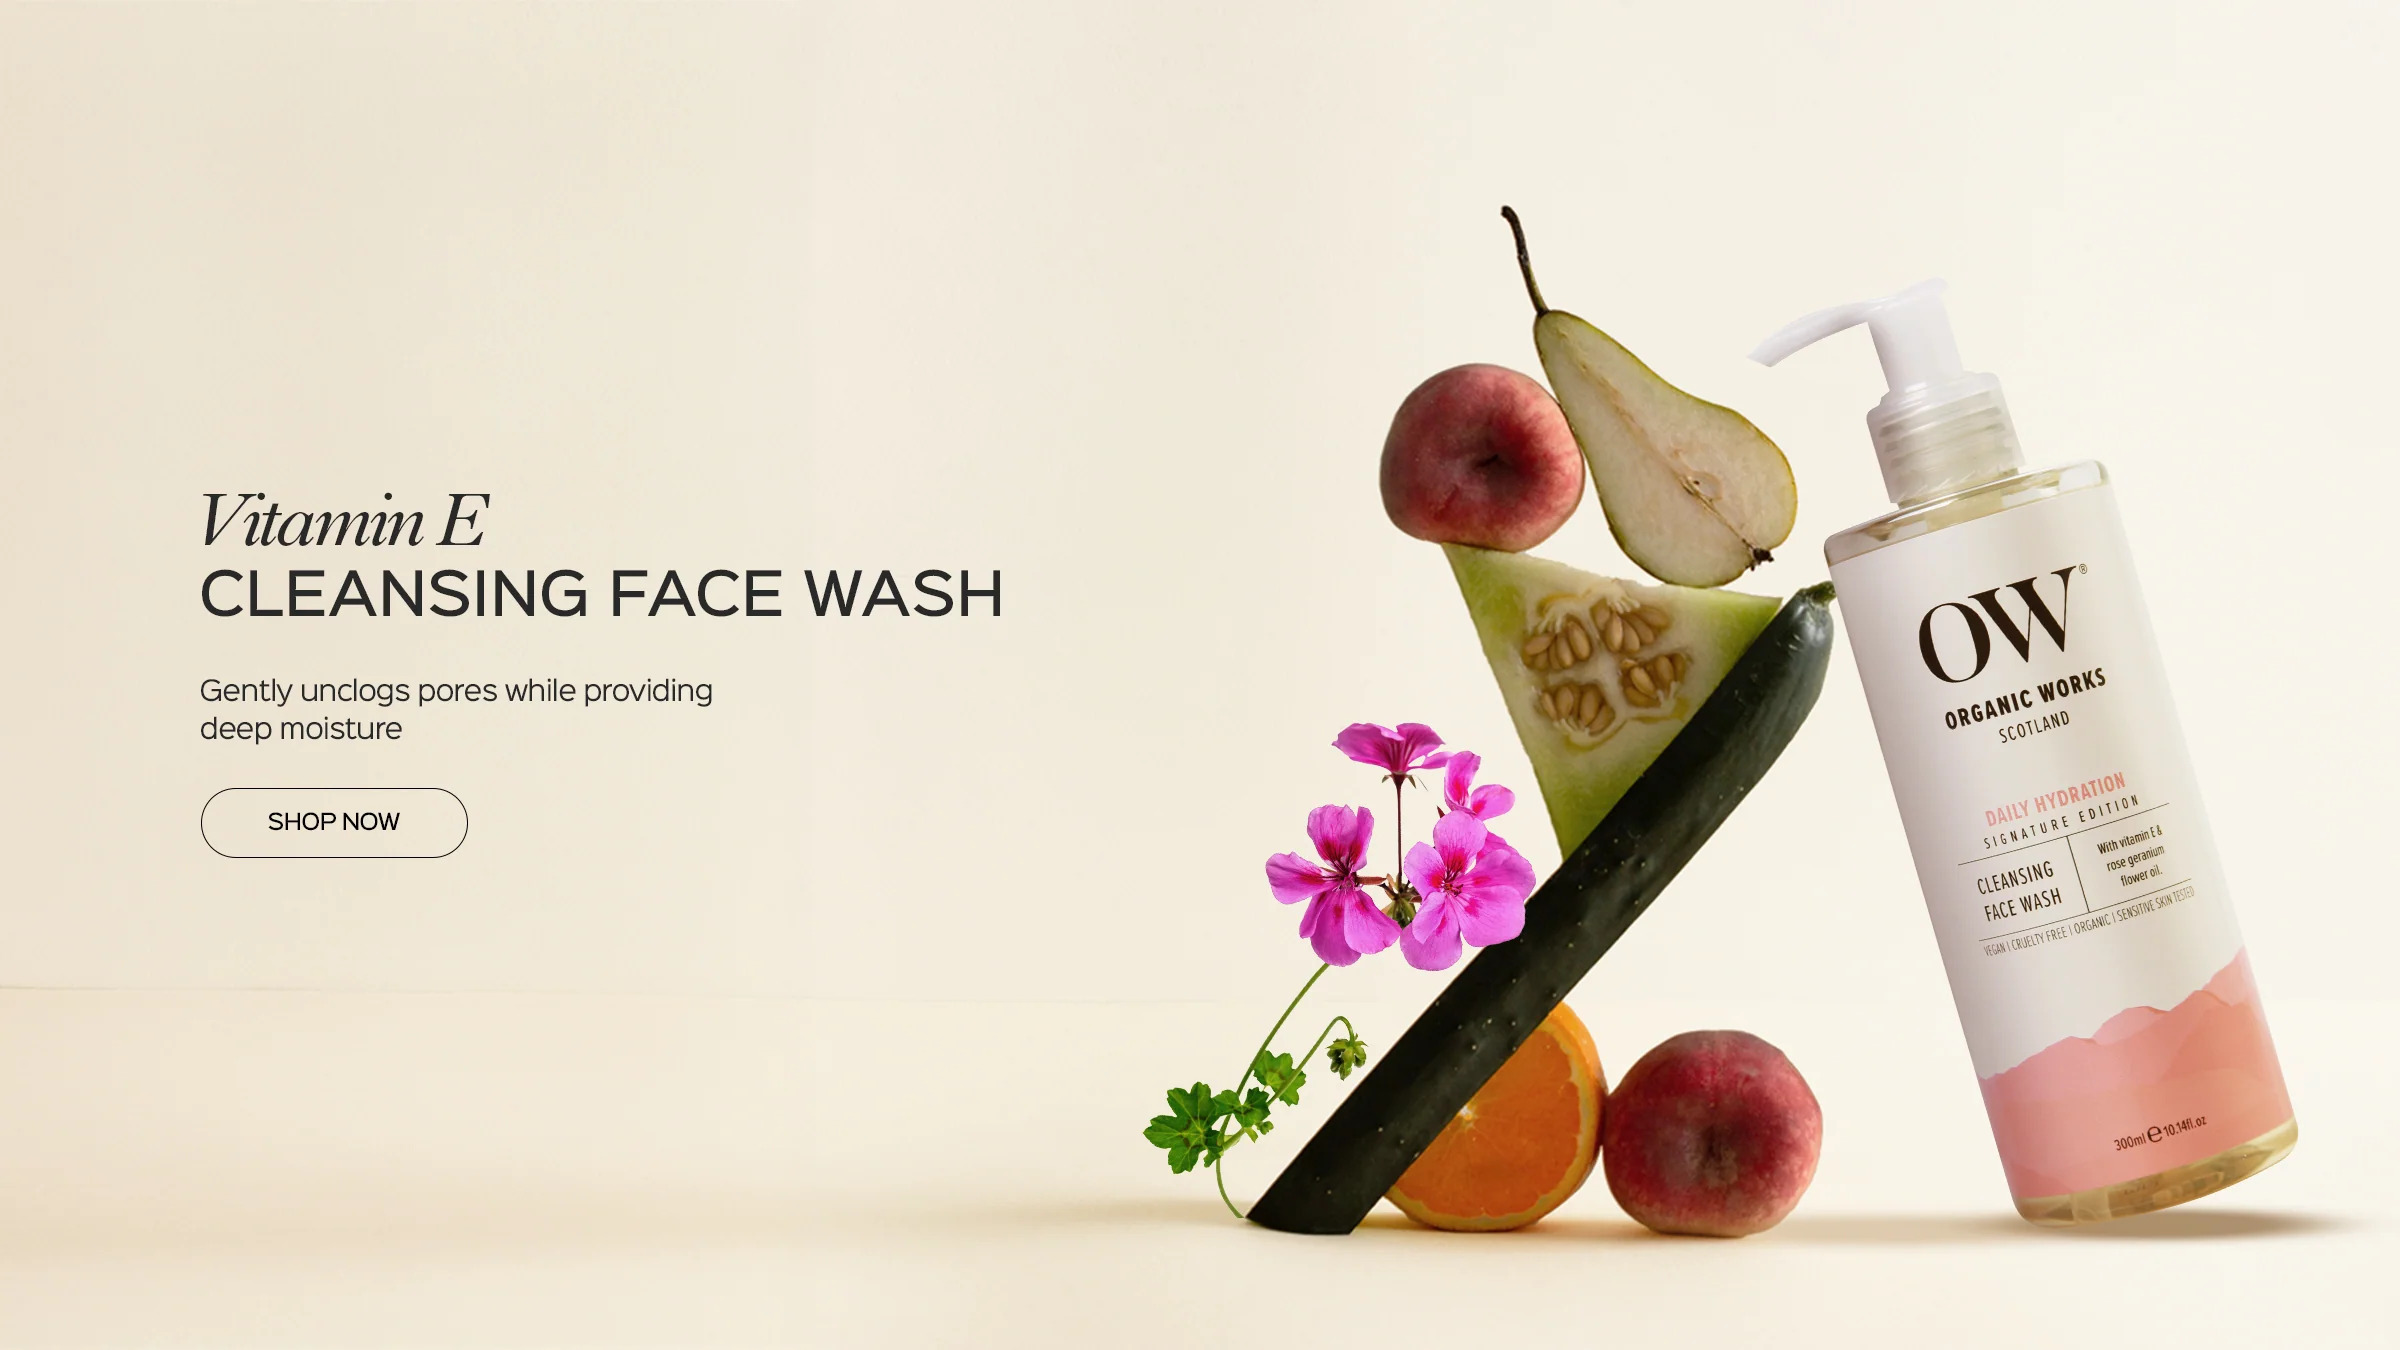 Organic Works Vitamin E Cleansing Face Wash